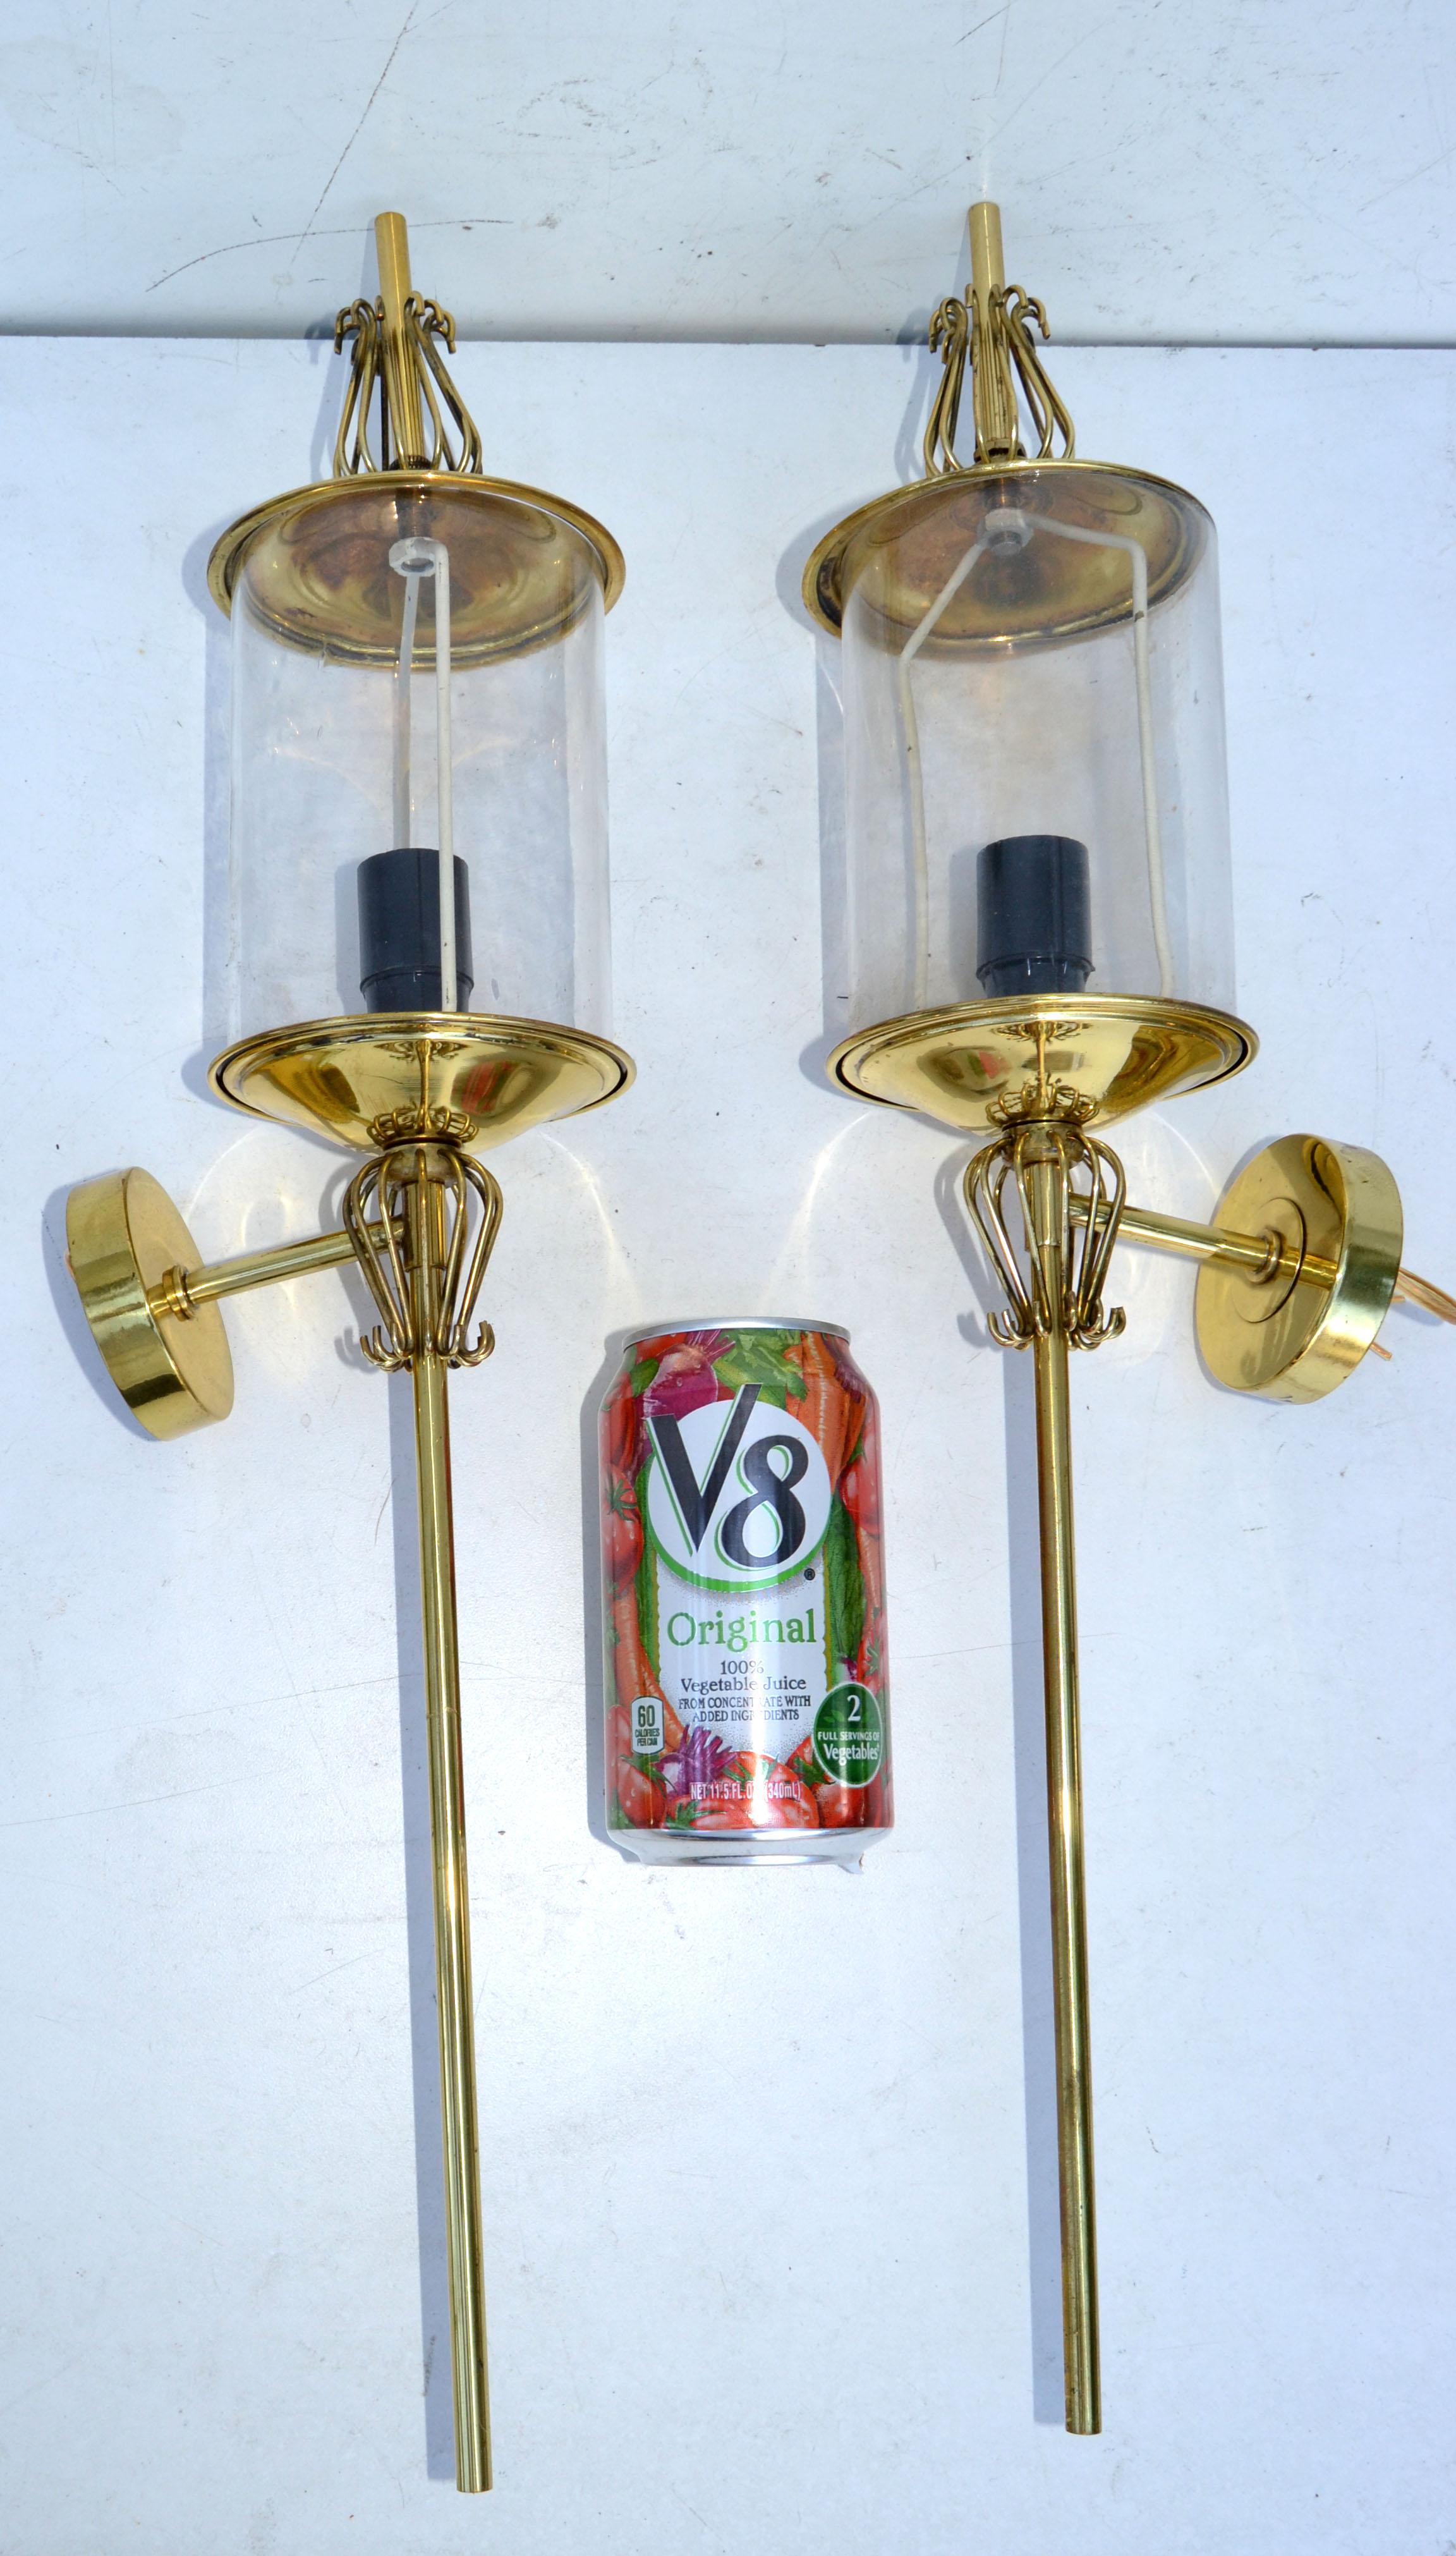 Pair of Maison Lunel Brass & Glass Sconces, Wall Lamp French Mid-Century Modern For Sale 10